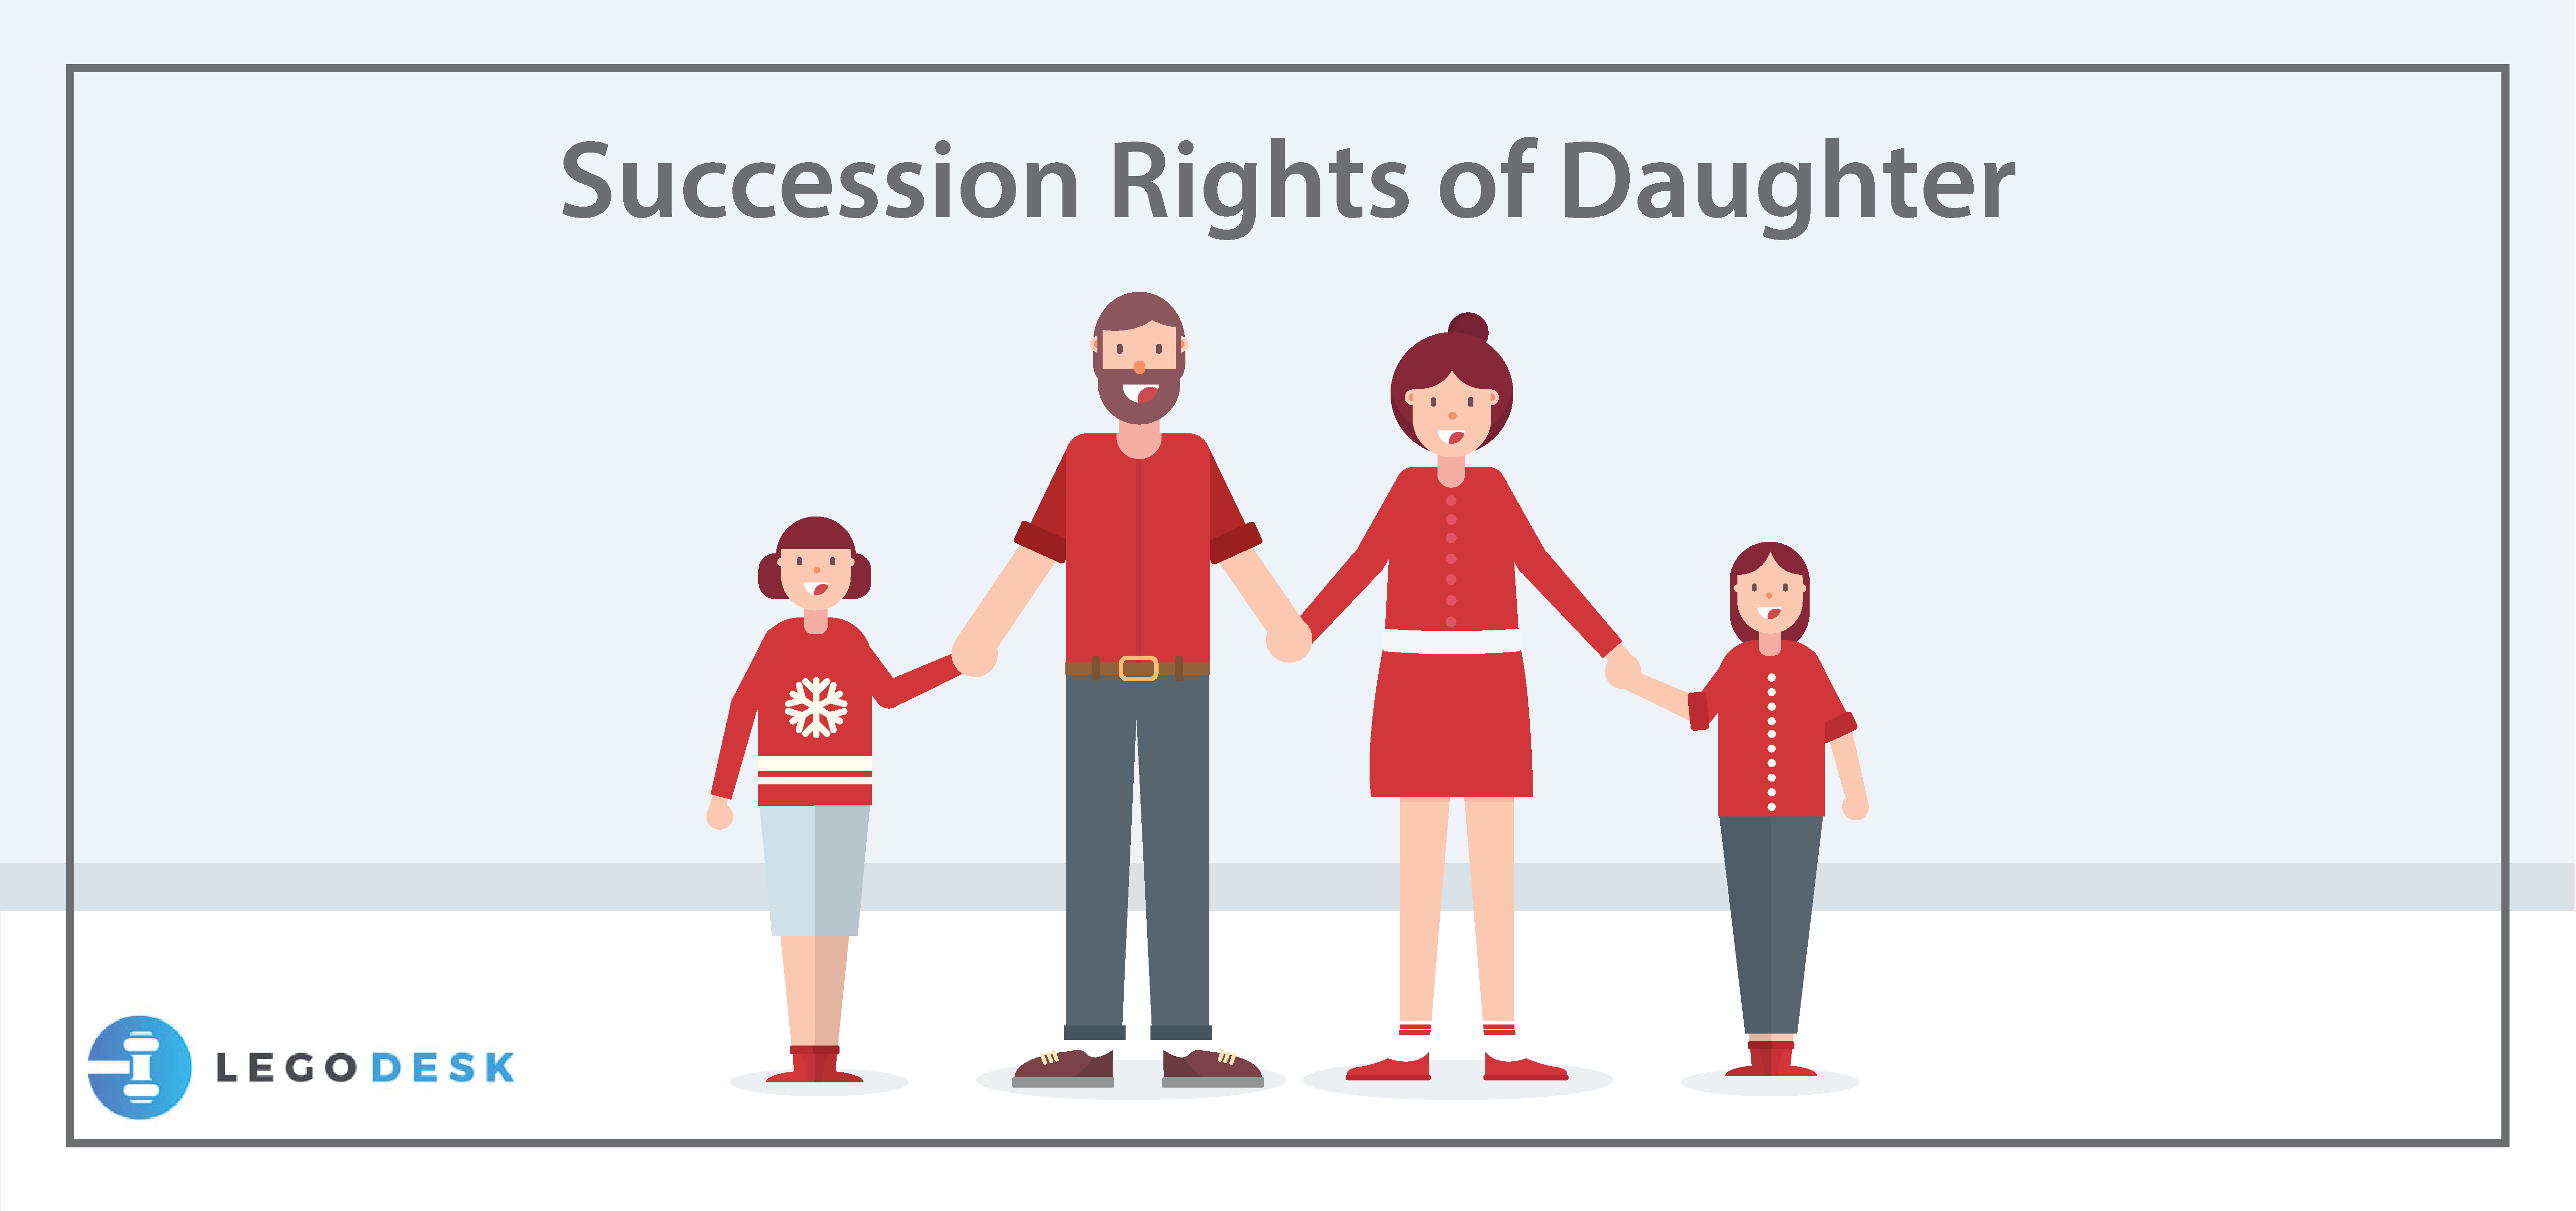 Succession Rights of Daughter